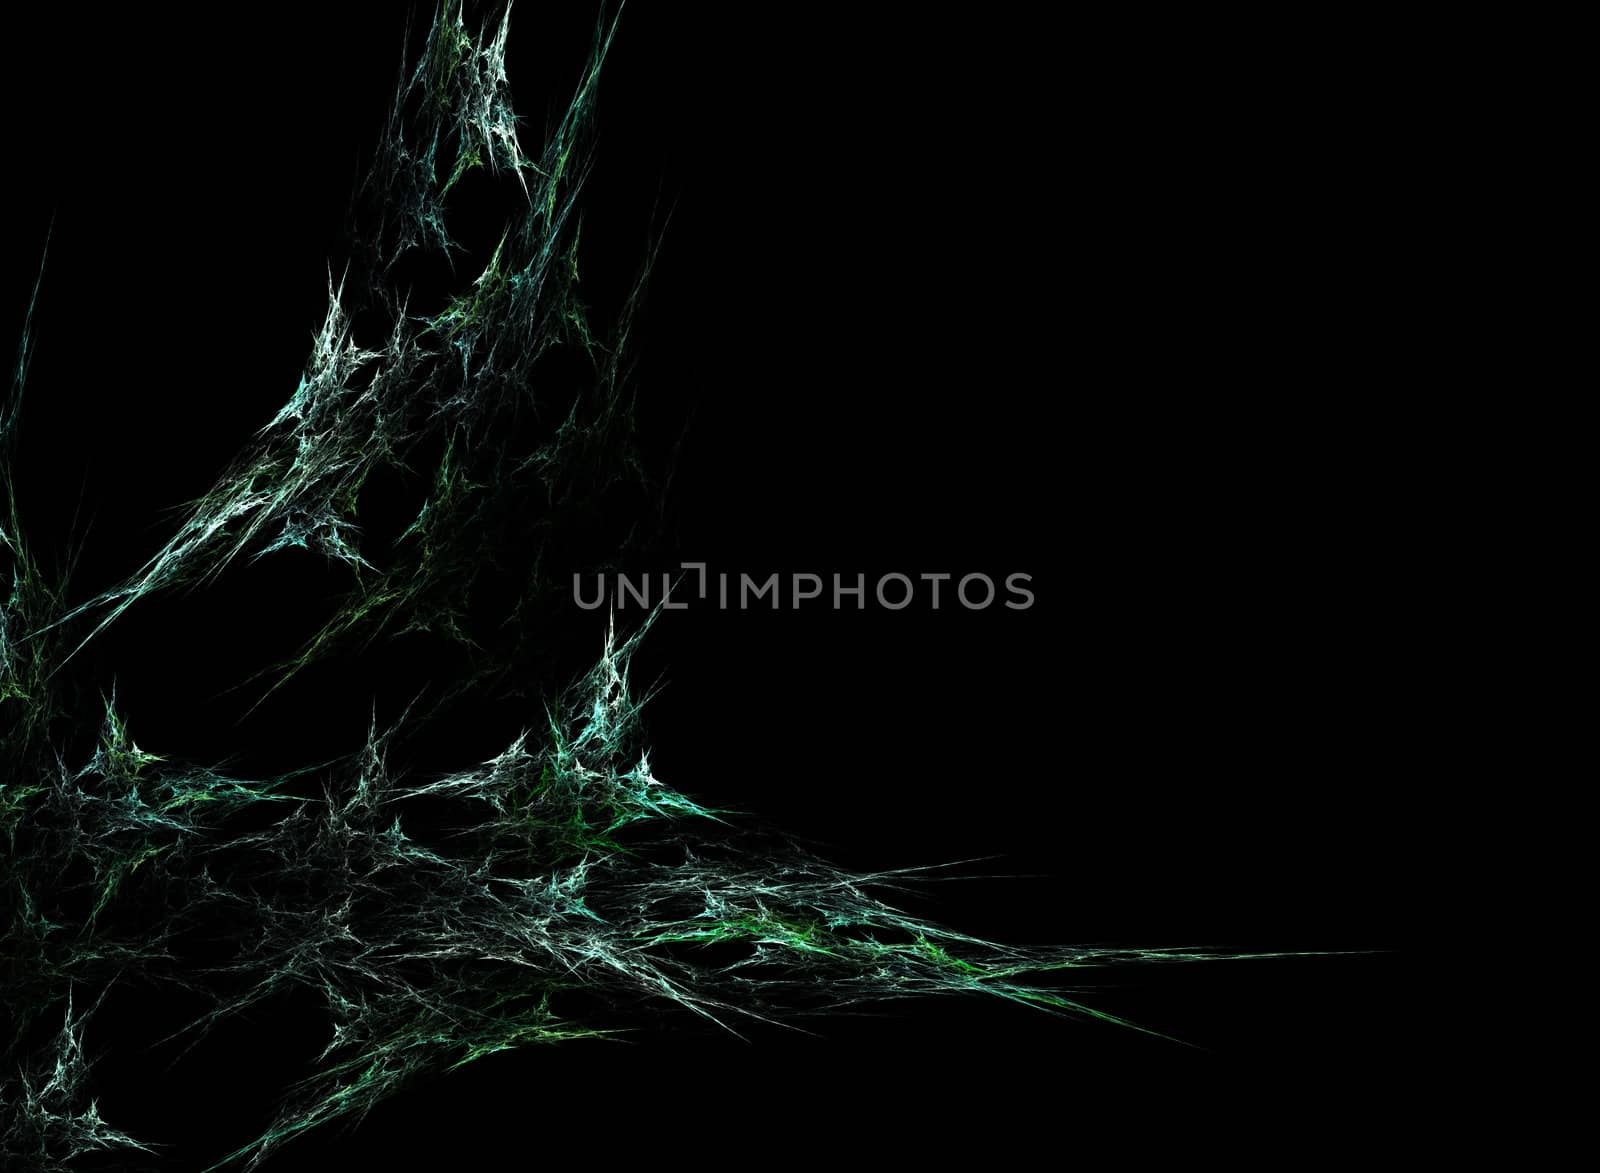 A fractal generated in Apophysis and edited in Photoshop.